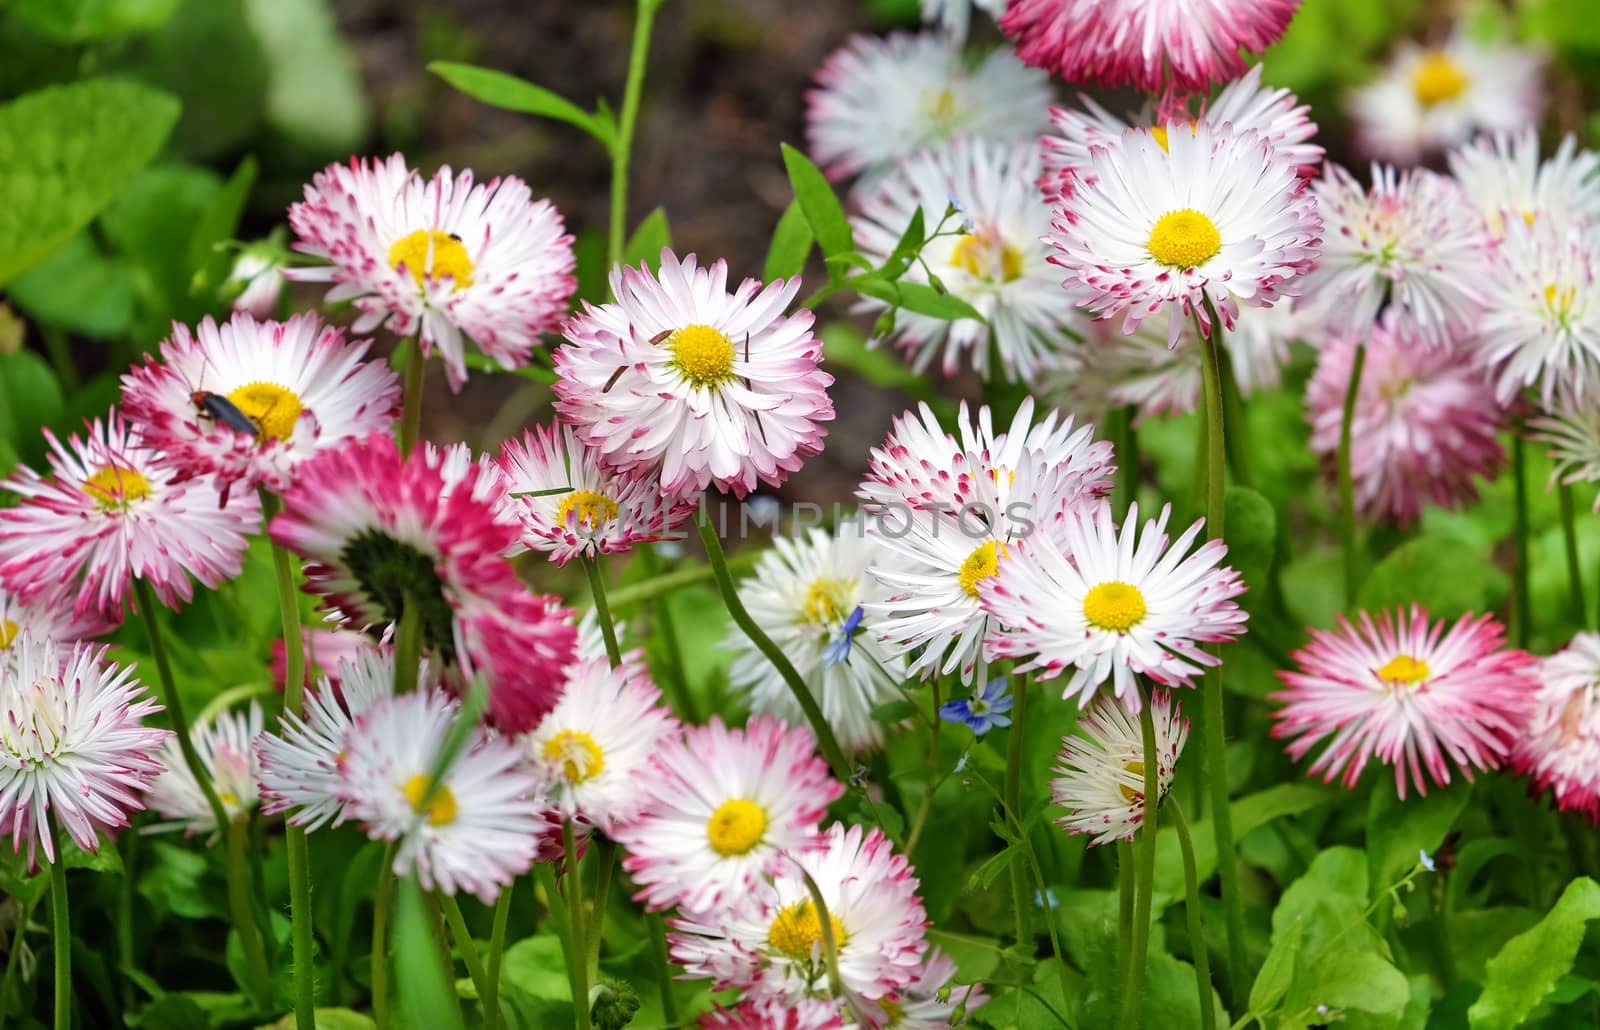 Blooming white and pink daisies. by leventina